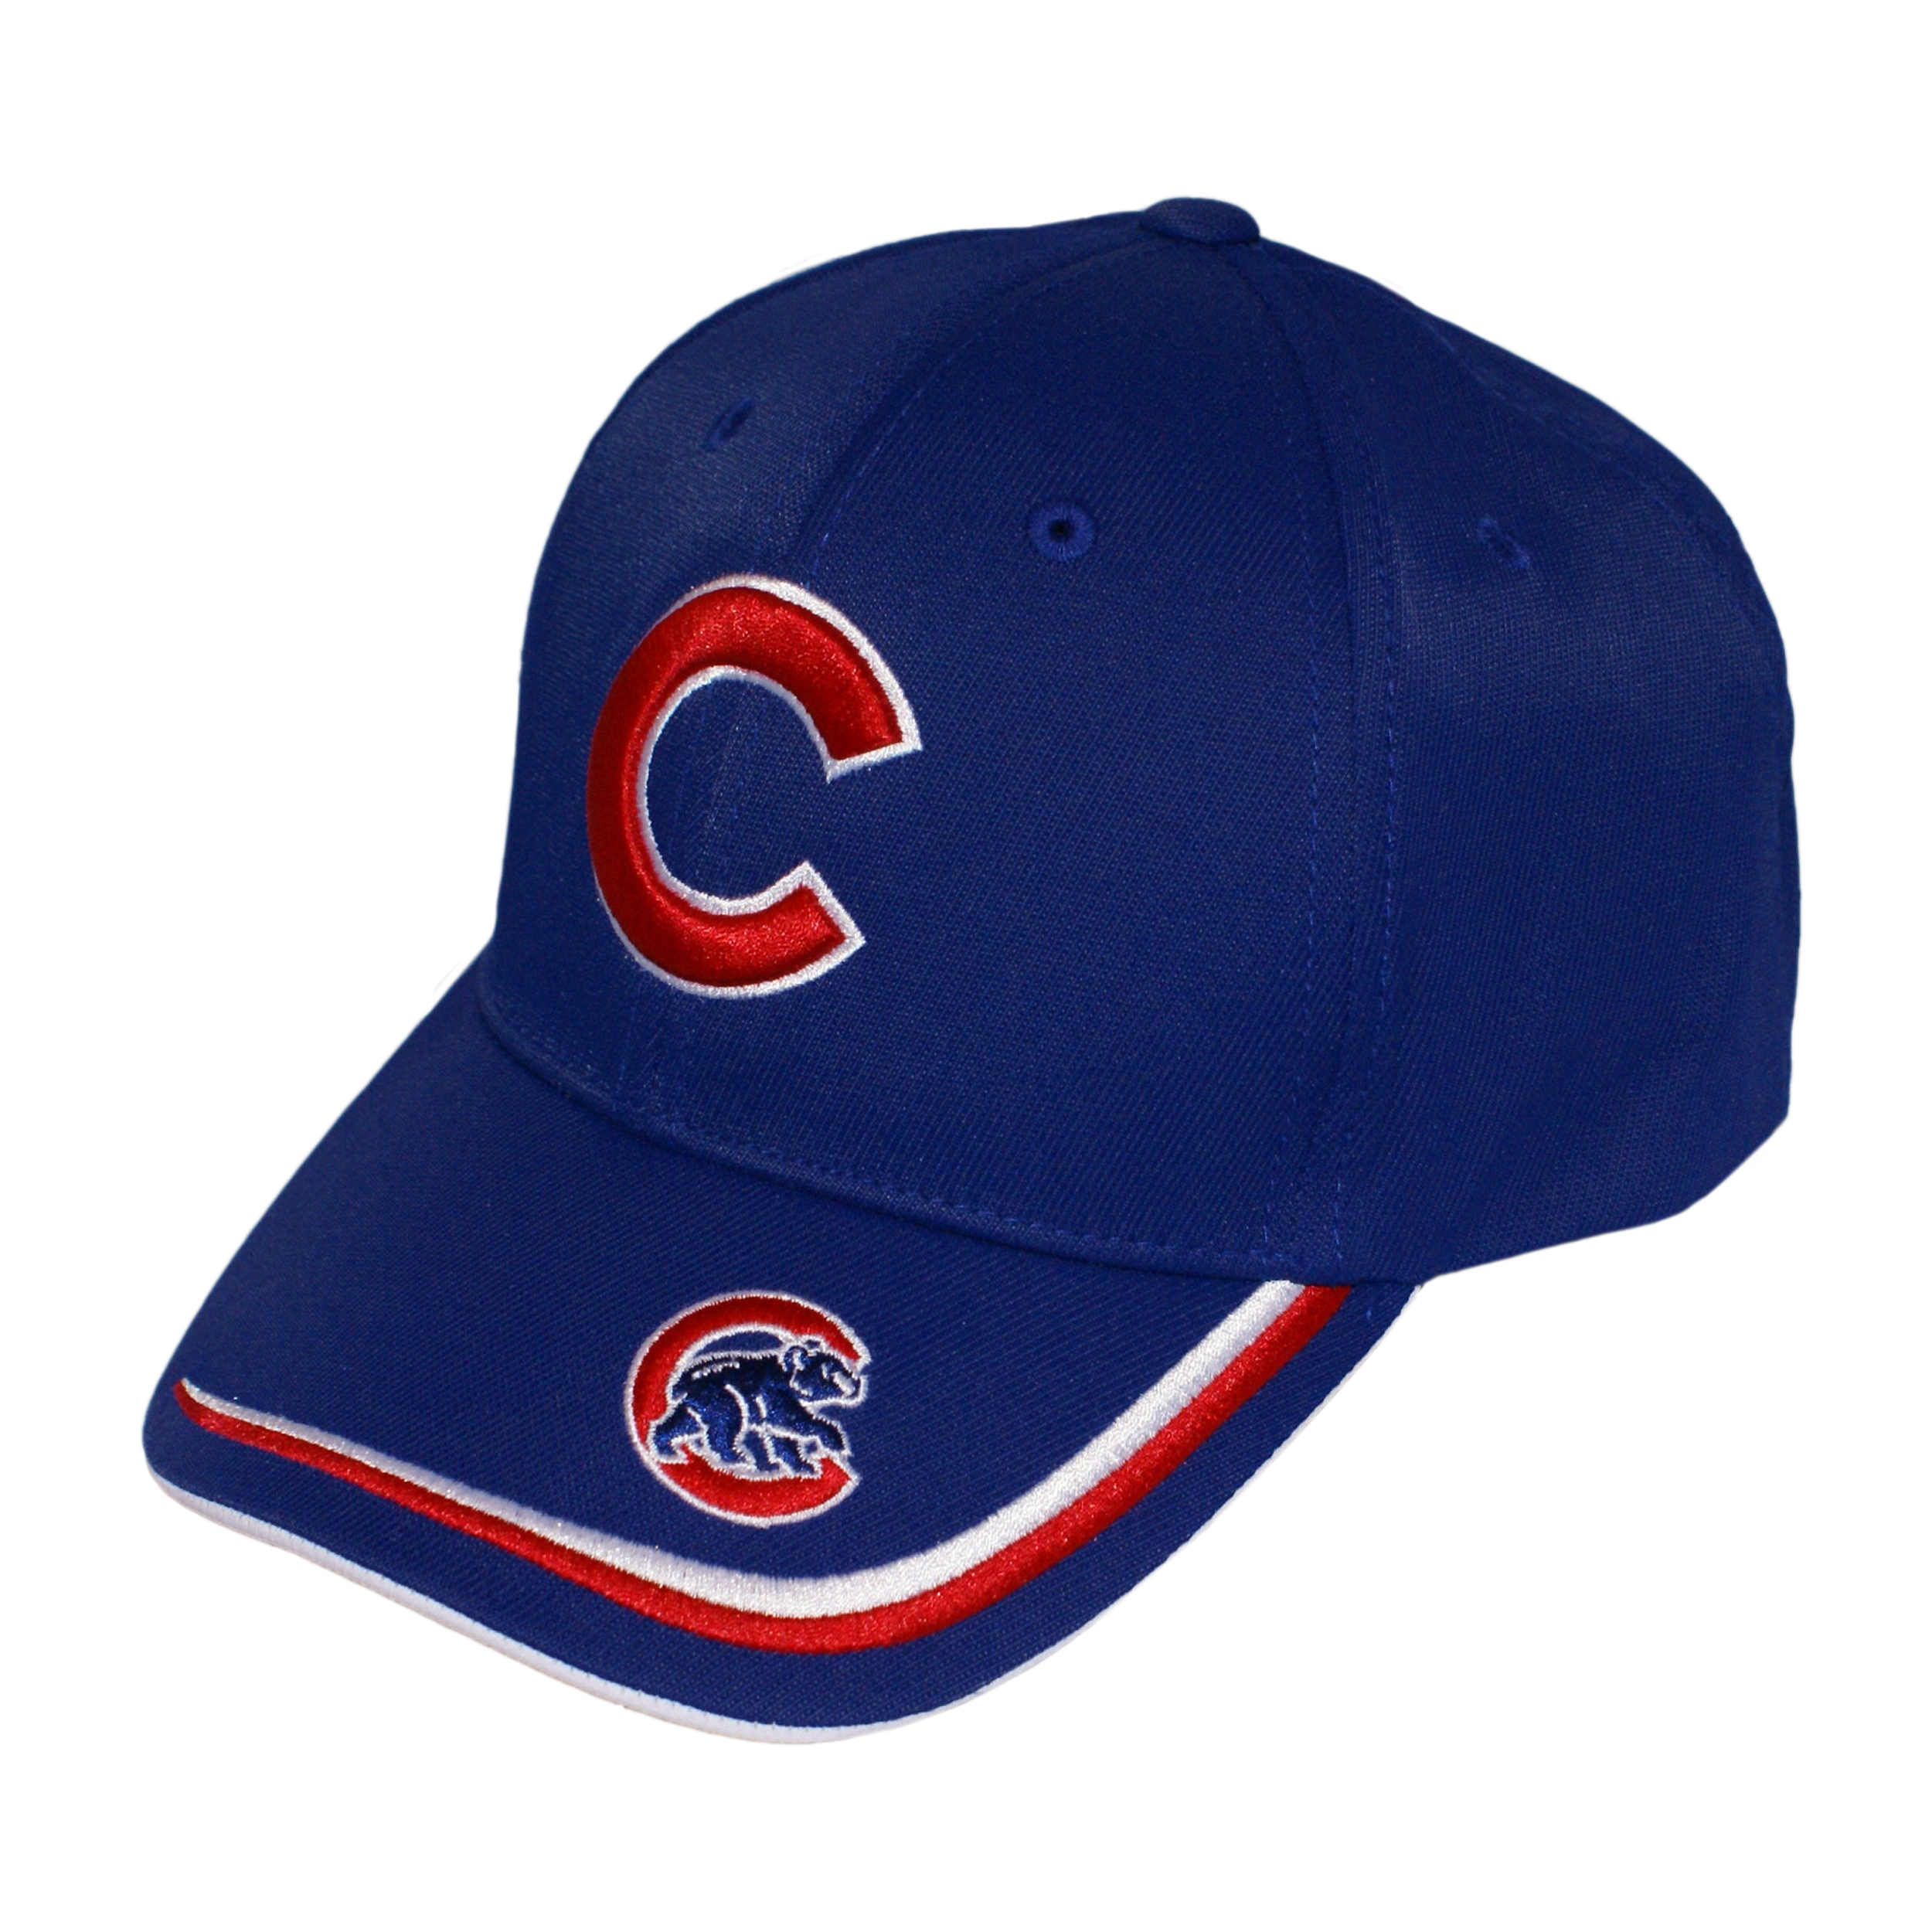 Fan Favorite - MLB Forest Cap, Chicago Cubs - image 1 of 2